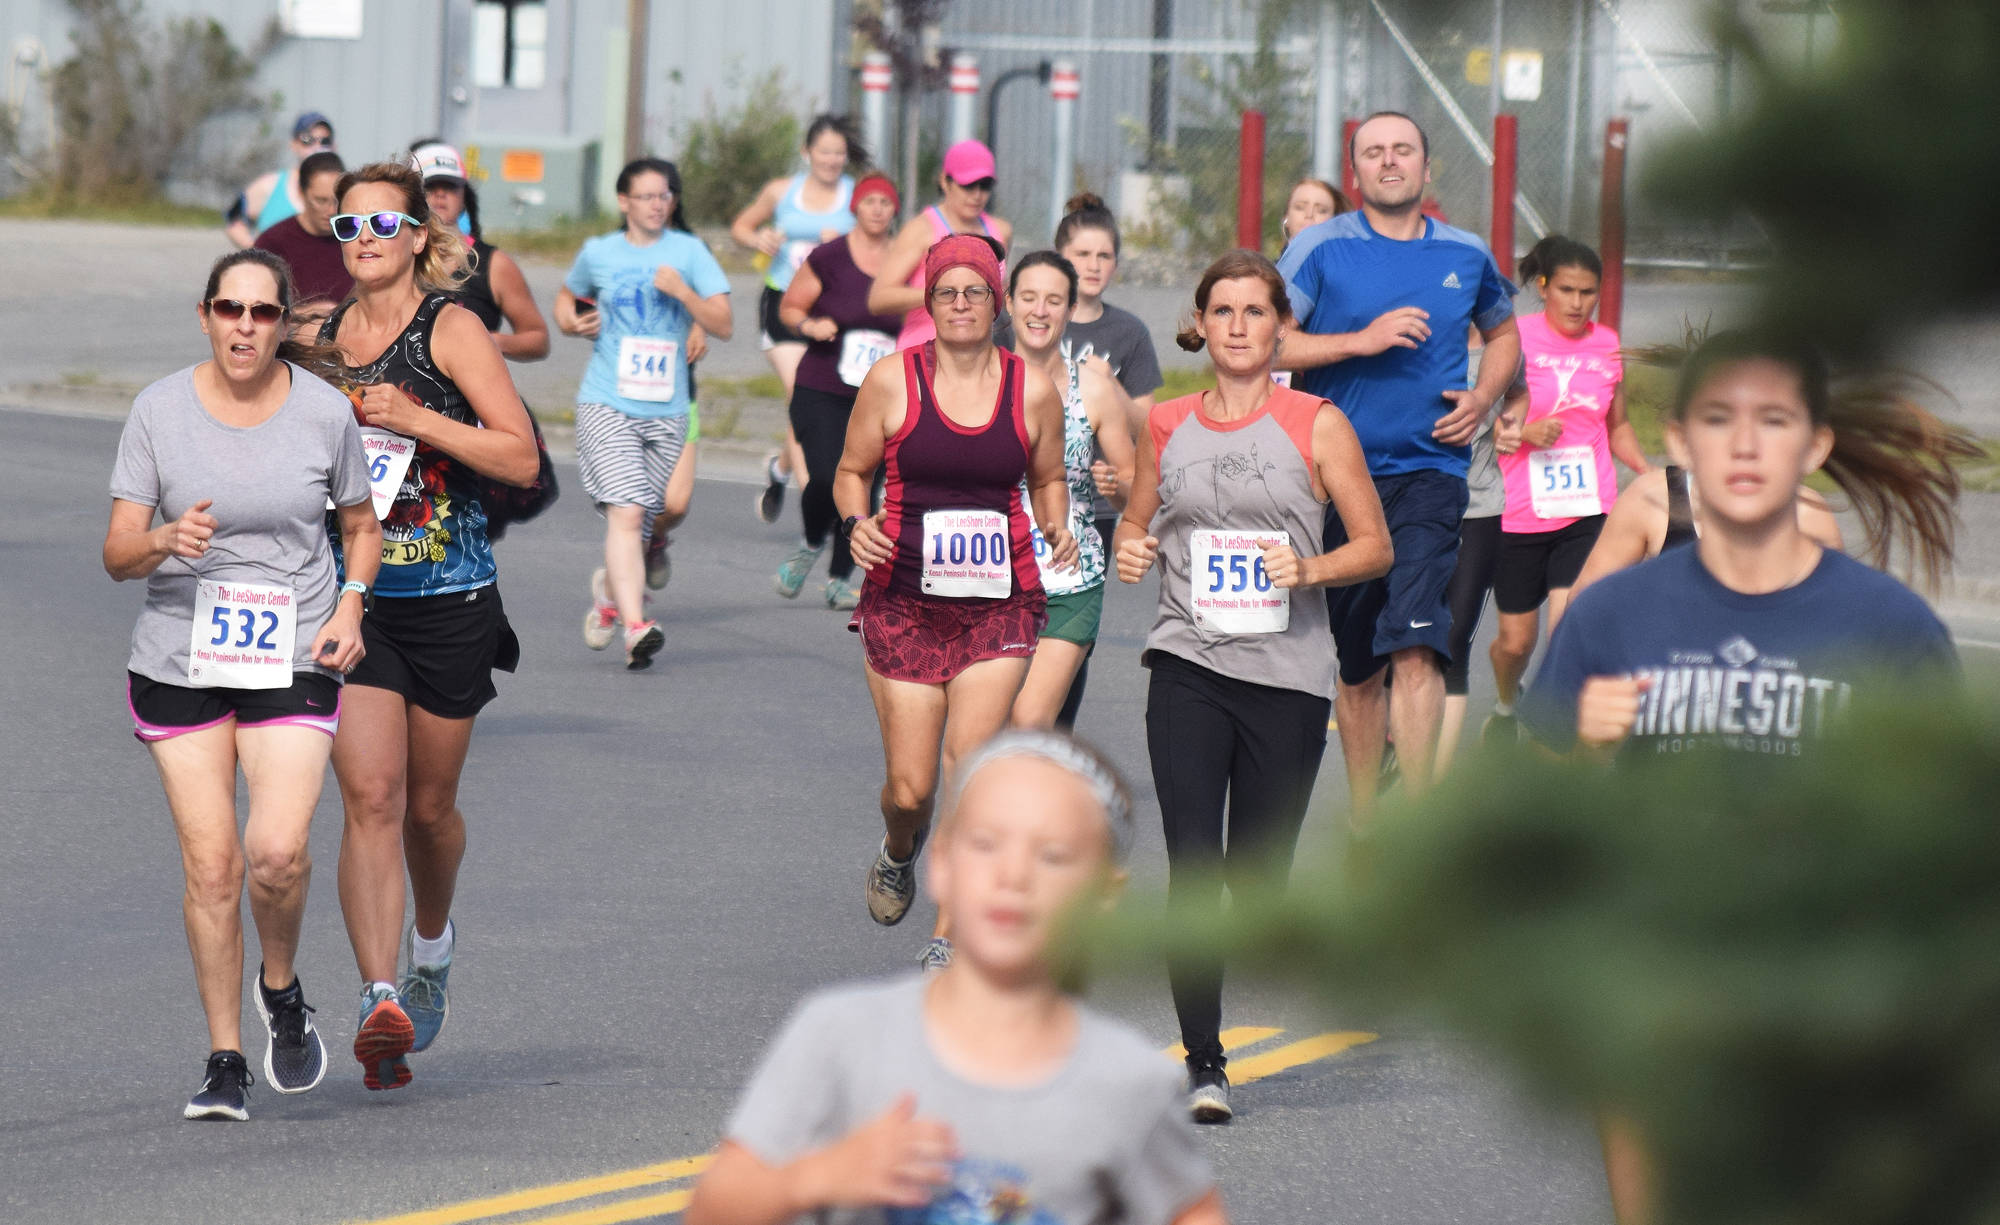 Deb Russ (532), Rachel Babbit (1000) and Tammy Fann (556) run with the pack early Saturday, Aug. 10, 2019, at the 32nd annual Run for Women in Kenai, Alaska. (Photo by Joey Klecka/Peninsula Clarion)